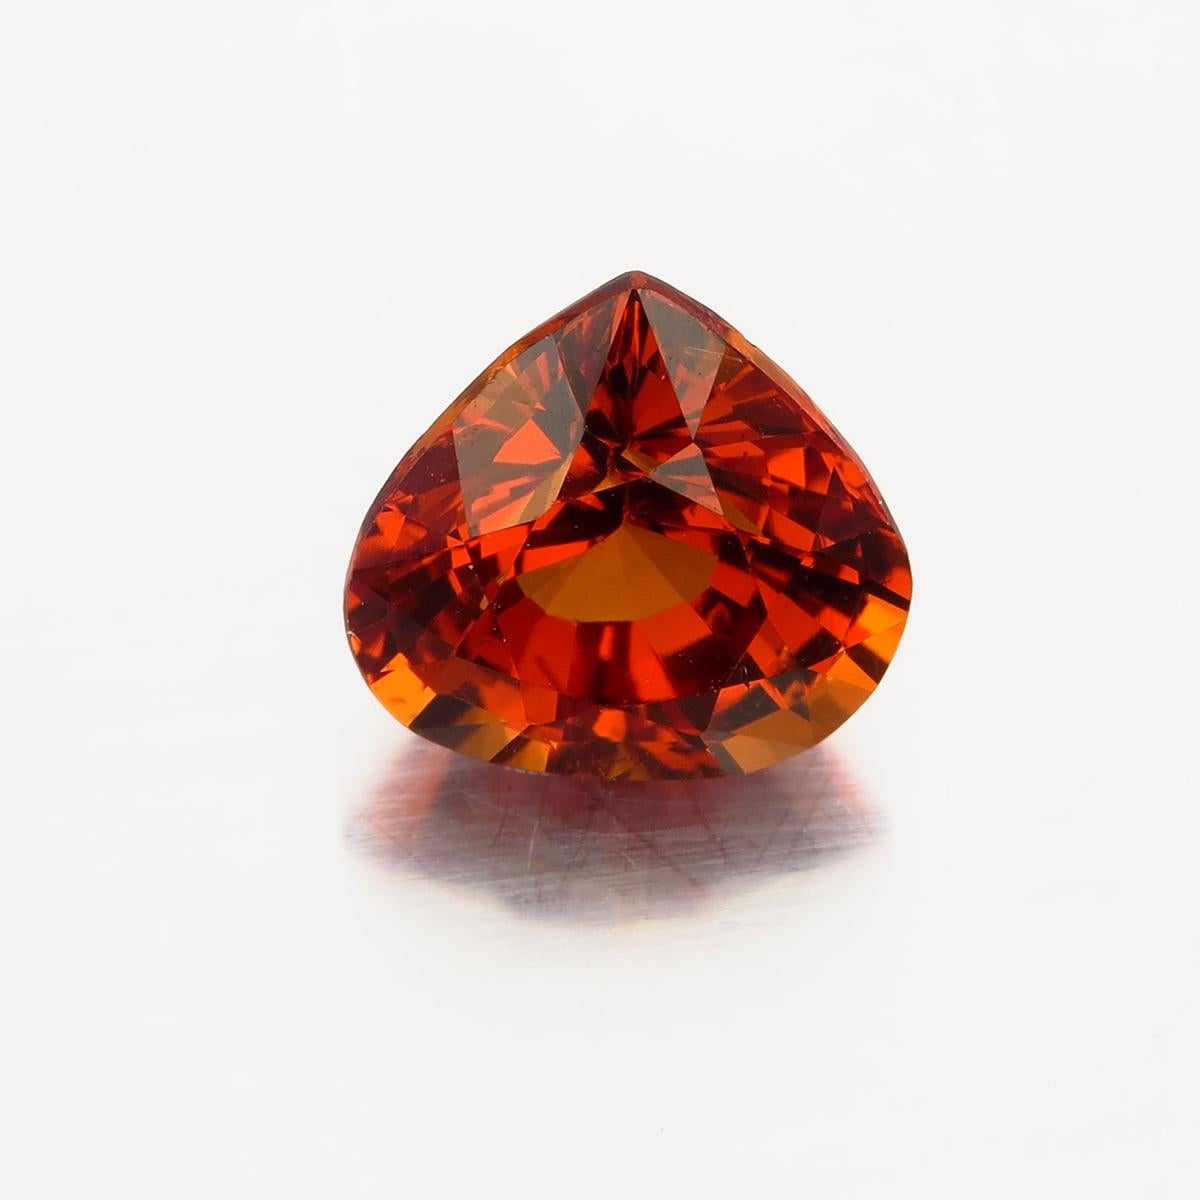 2.29 Carat Hessonite Garnet Lotus Certified
Shape: Pear
Cutting Style: Faceted Brilliant Modified Step
Dimensions: 8.42x 7.83 x 5.36 mm
Color: Orange vivid saturation with a medium tone
Weight: 2.29 Carat
No Heat or treatment
Lotus report: